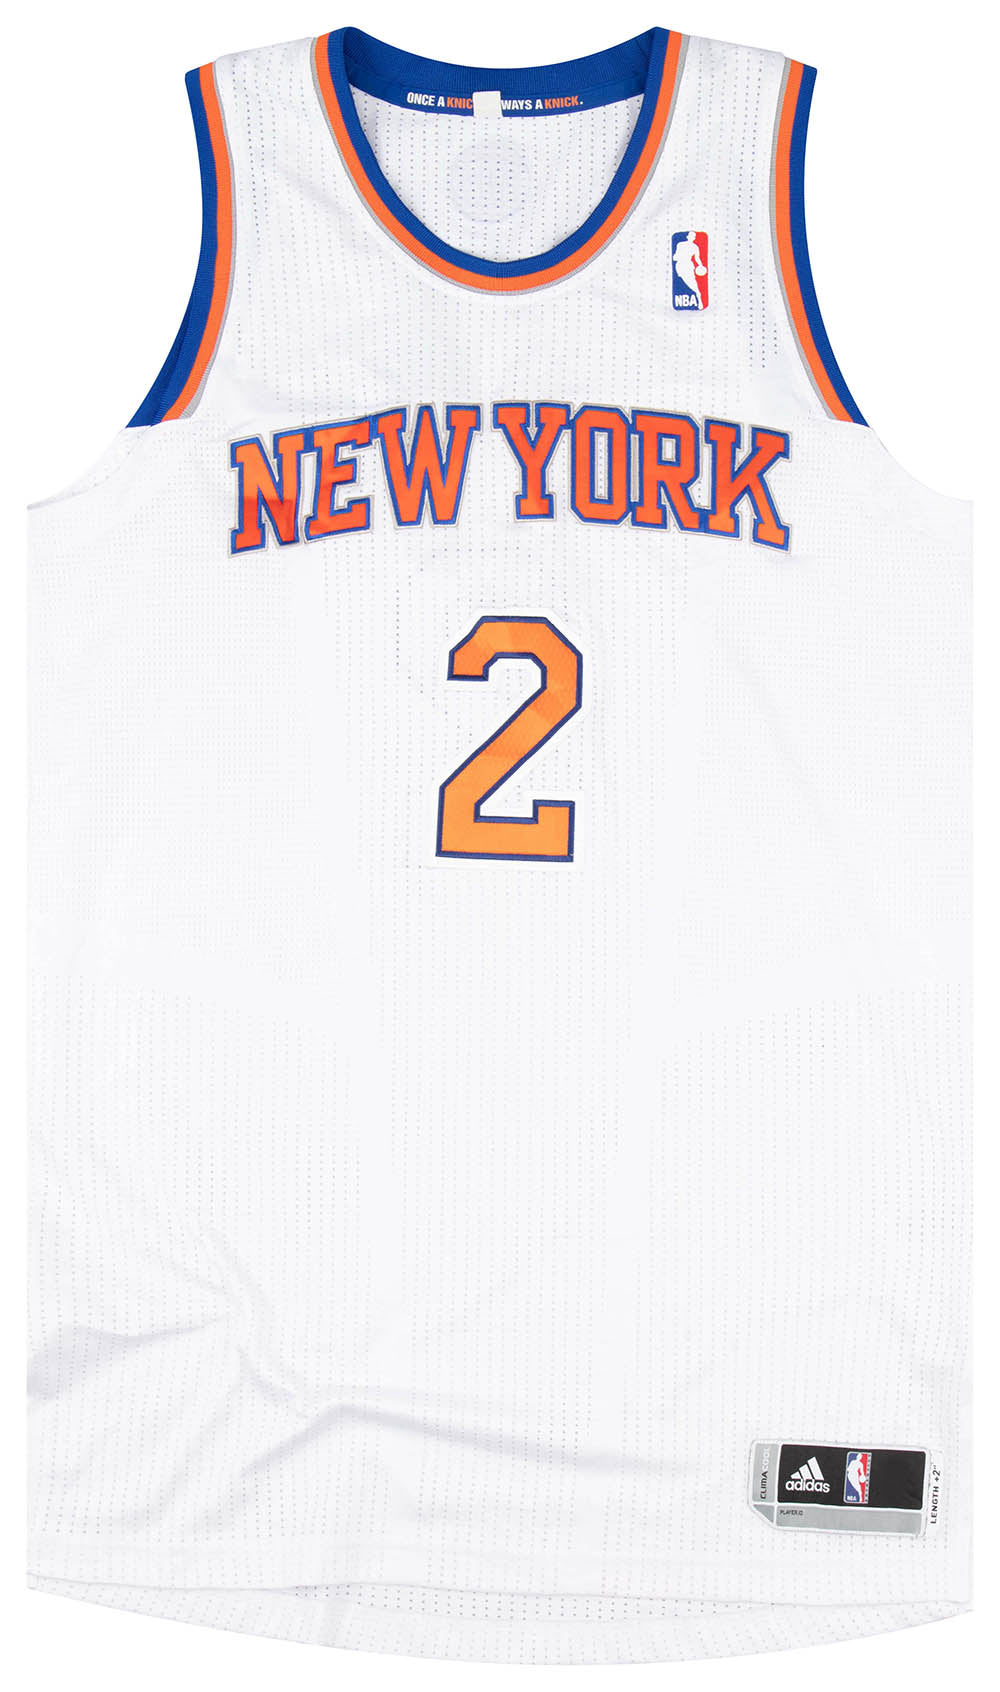 2012-14 AUTHENTIC SIGNED NEW YORK KNICKS FELTON #2 ADIDAS JERSEY (HOME) XL